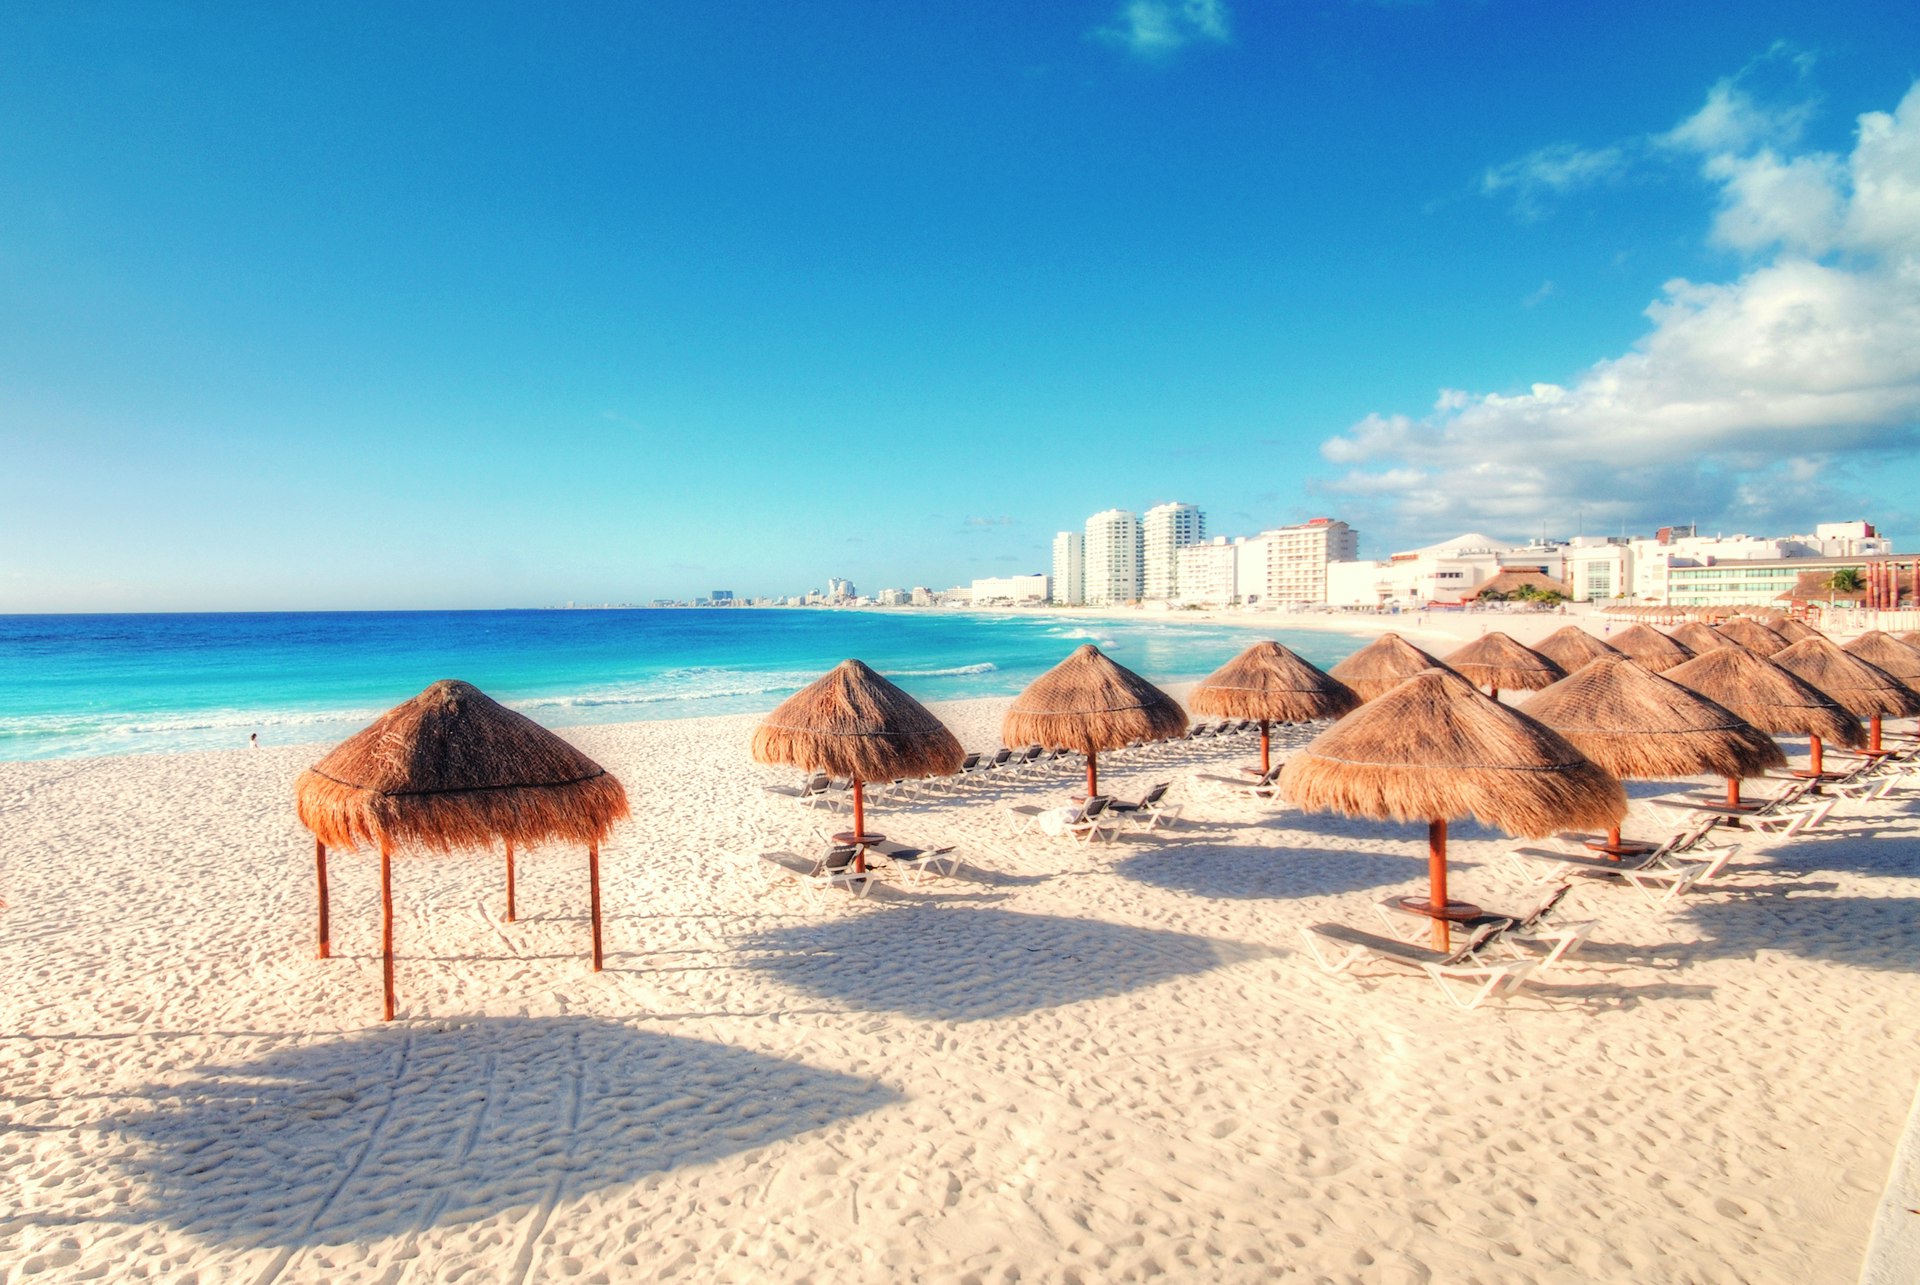 Rows of parasols and loungers on an empty beach in Cancun